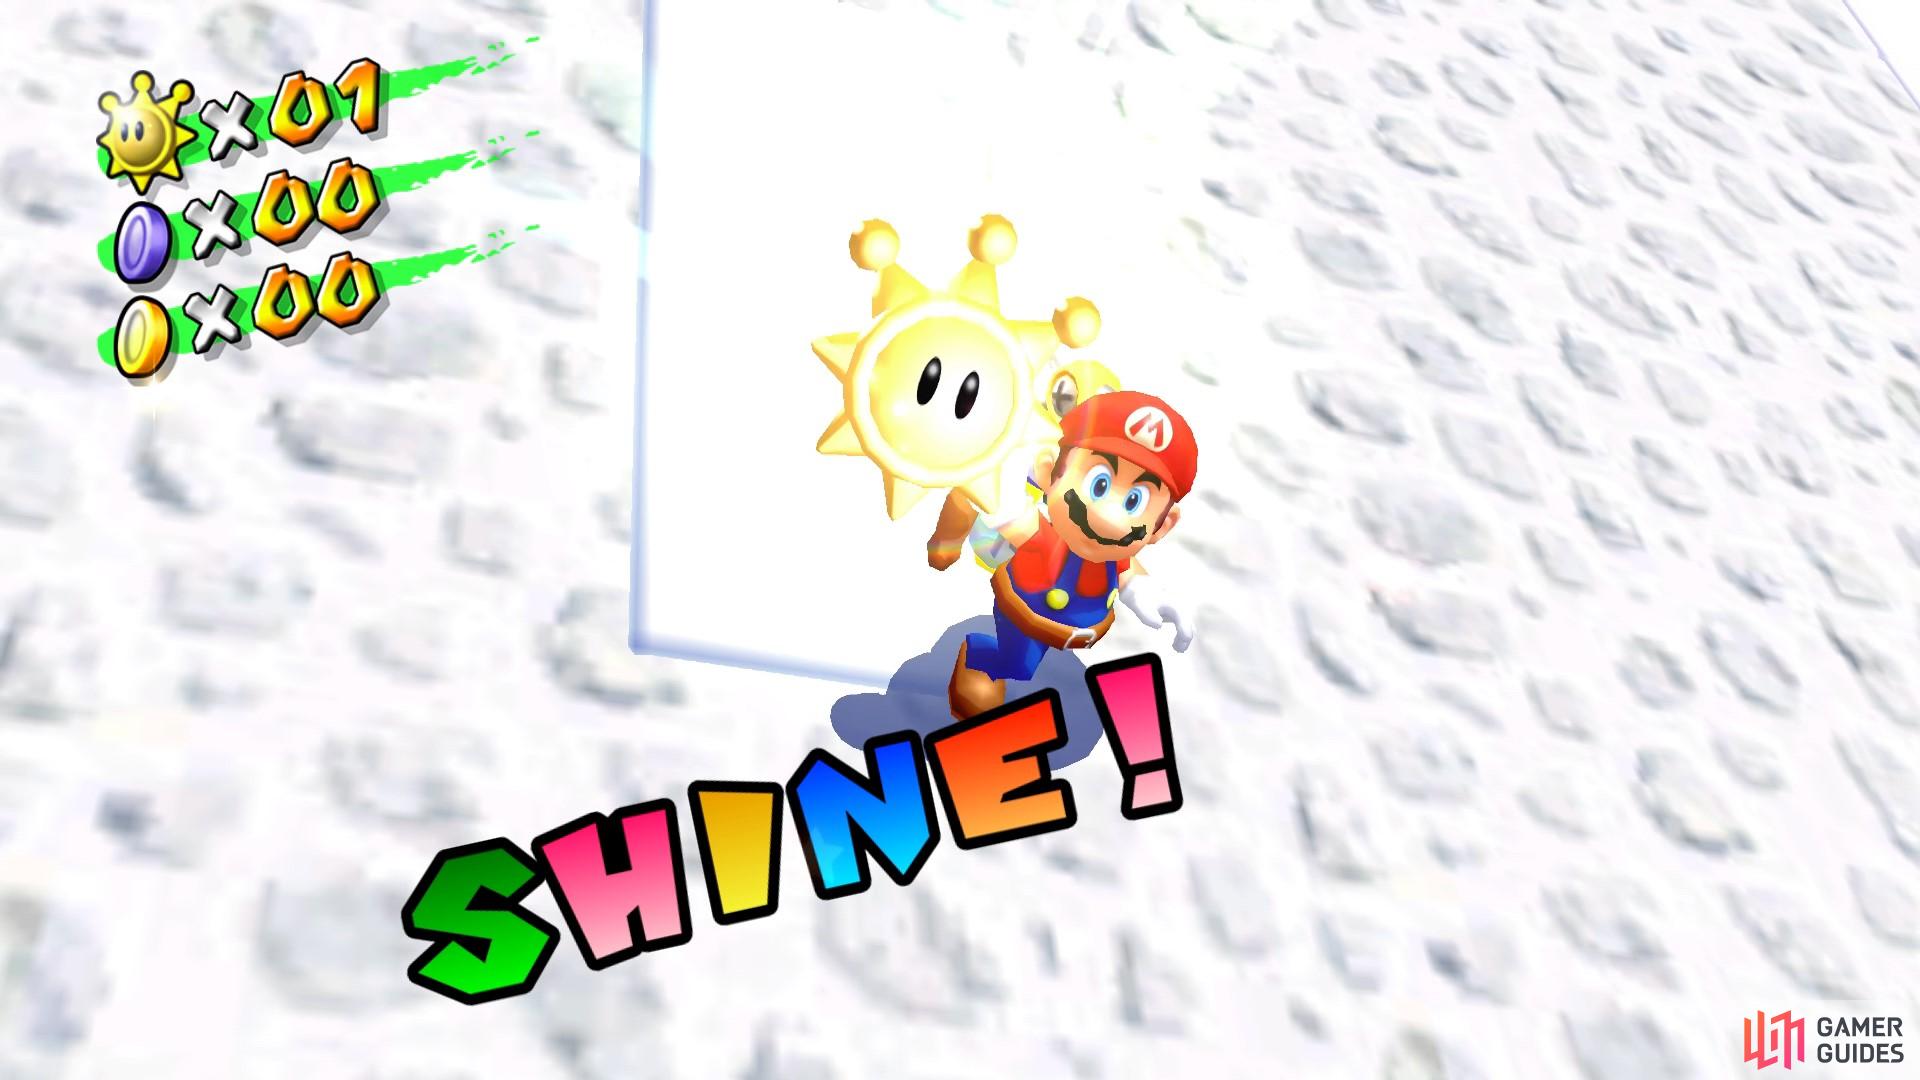 and you'll be able to collect your first Shine Sprite!